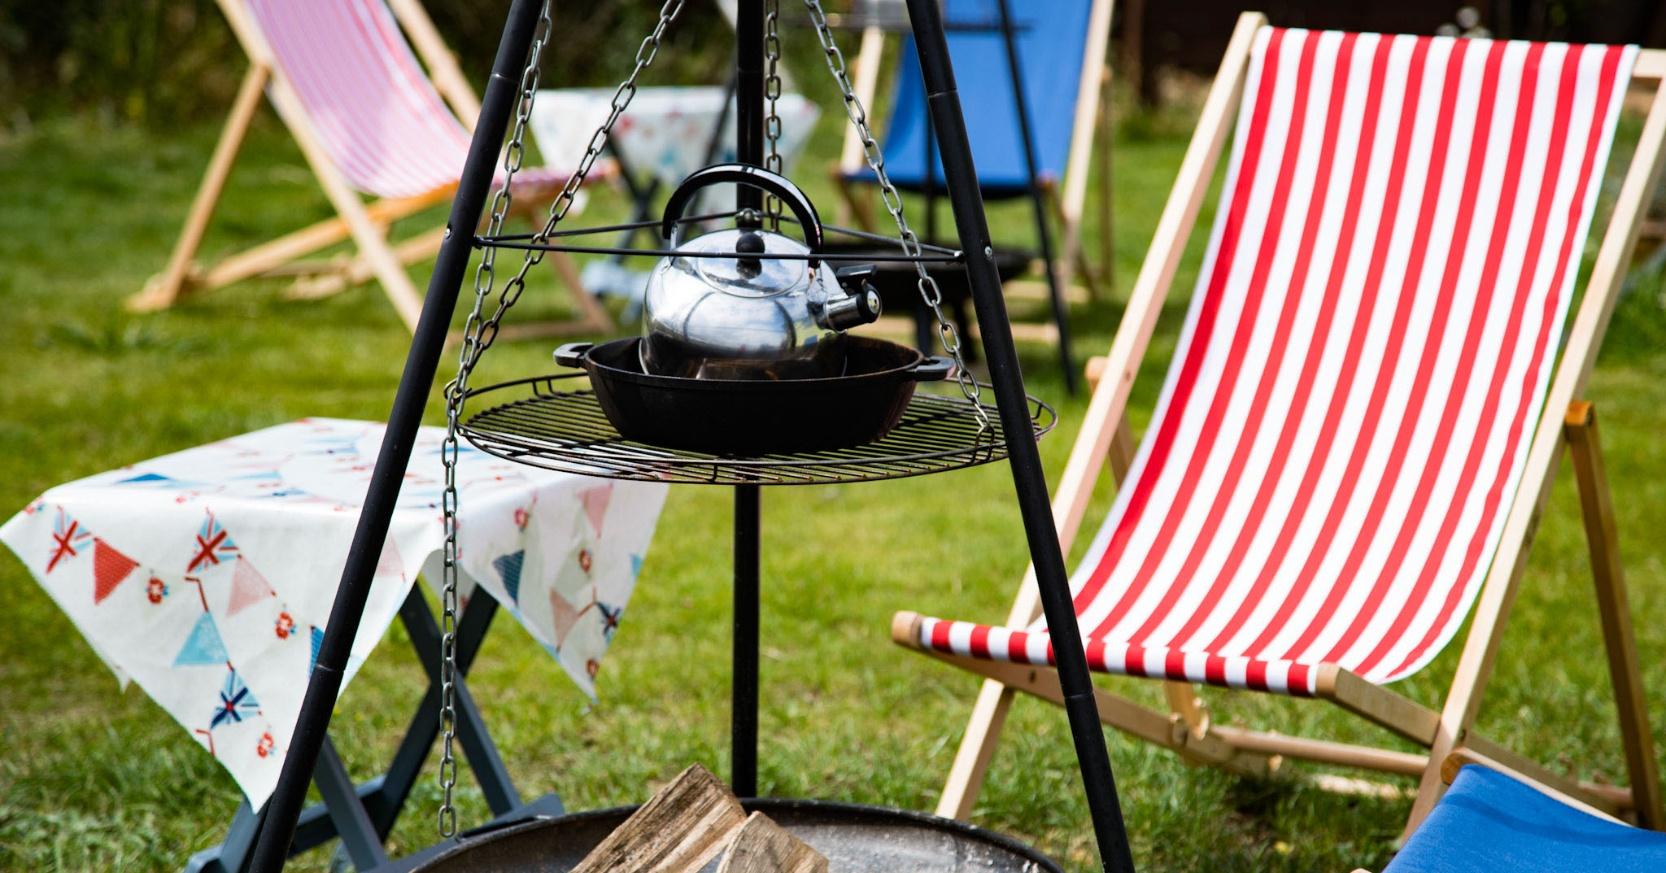 Enjoy a fire and bbq outside your glamping shepherds huts here at Hunstanton glamping